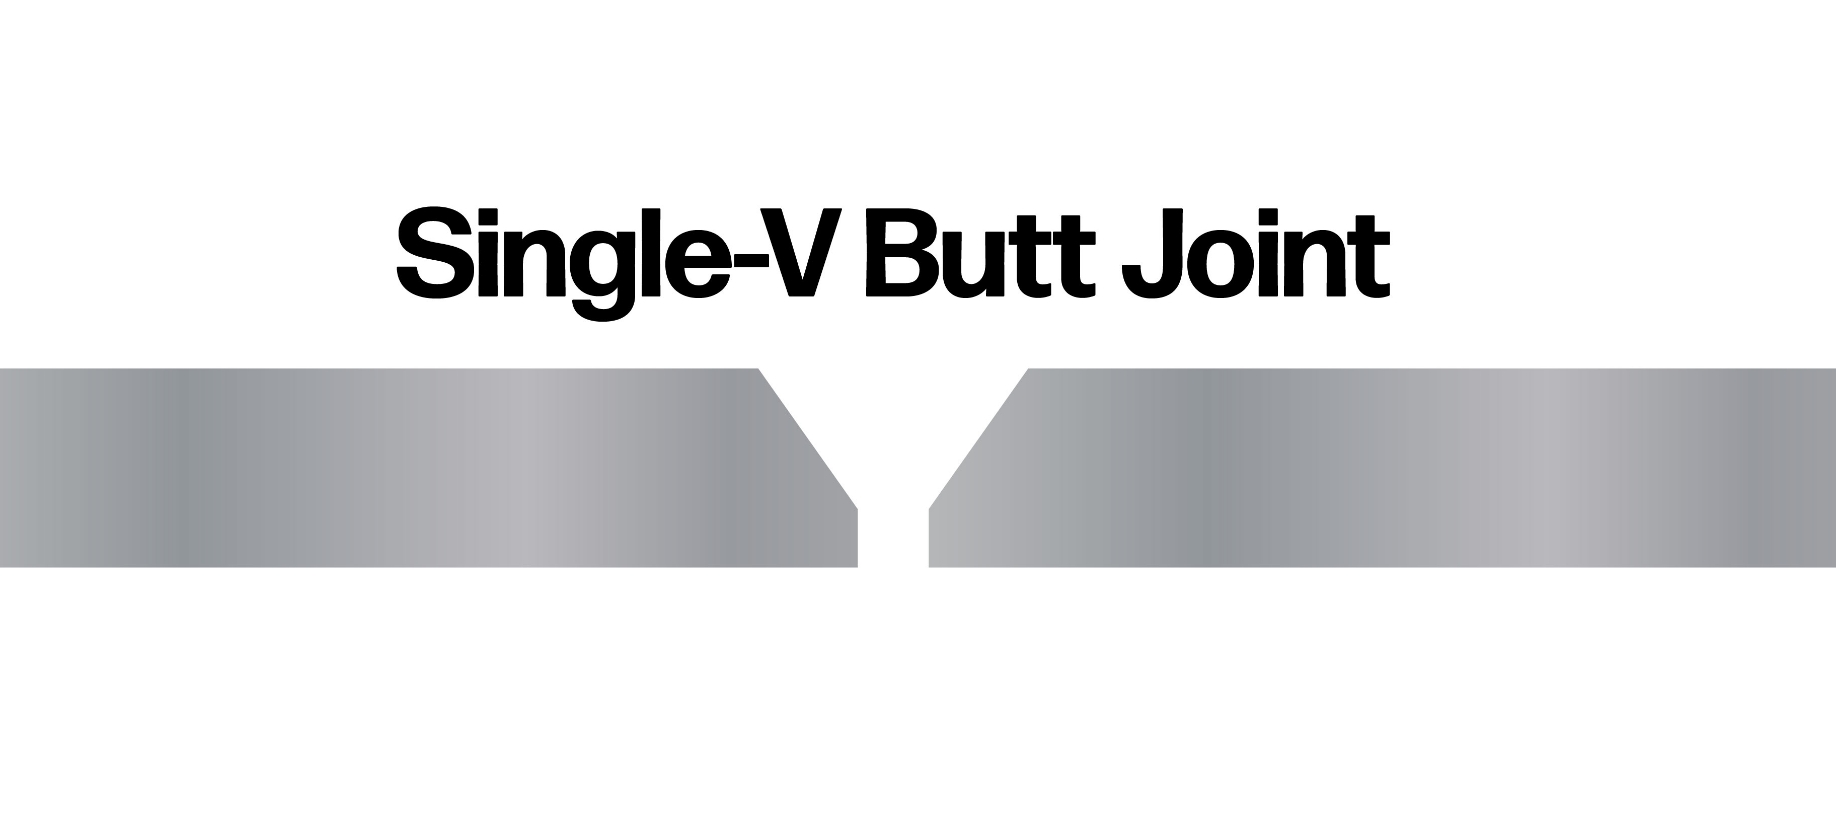 Single V Butt Joint Graphic